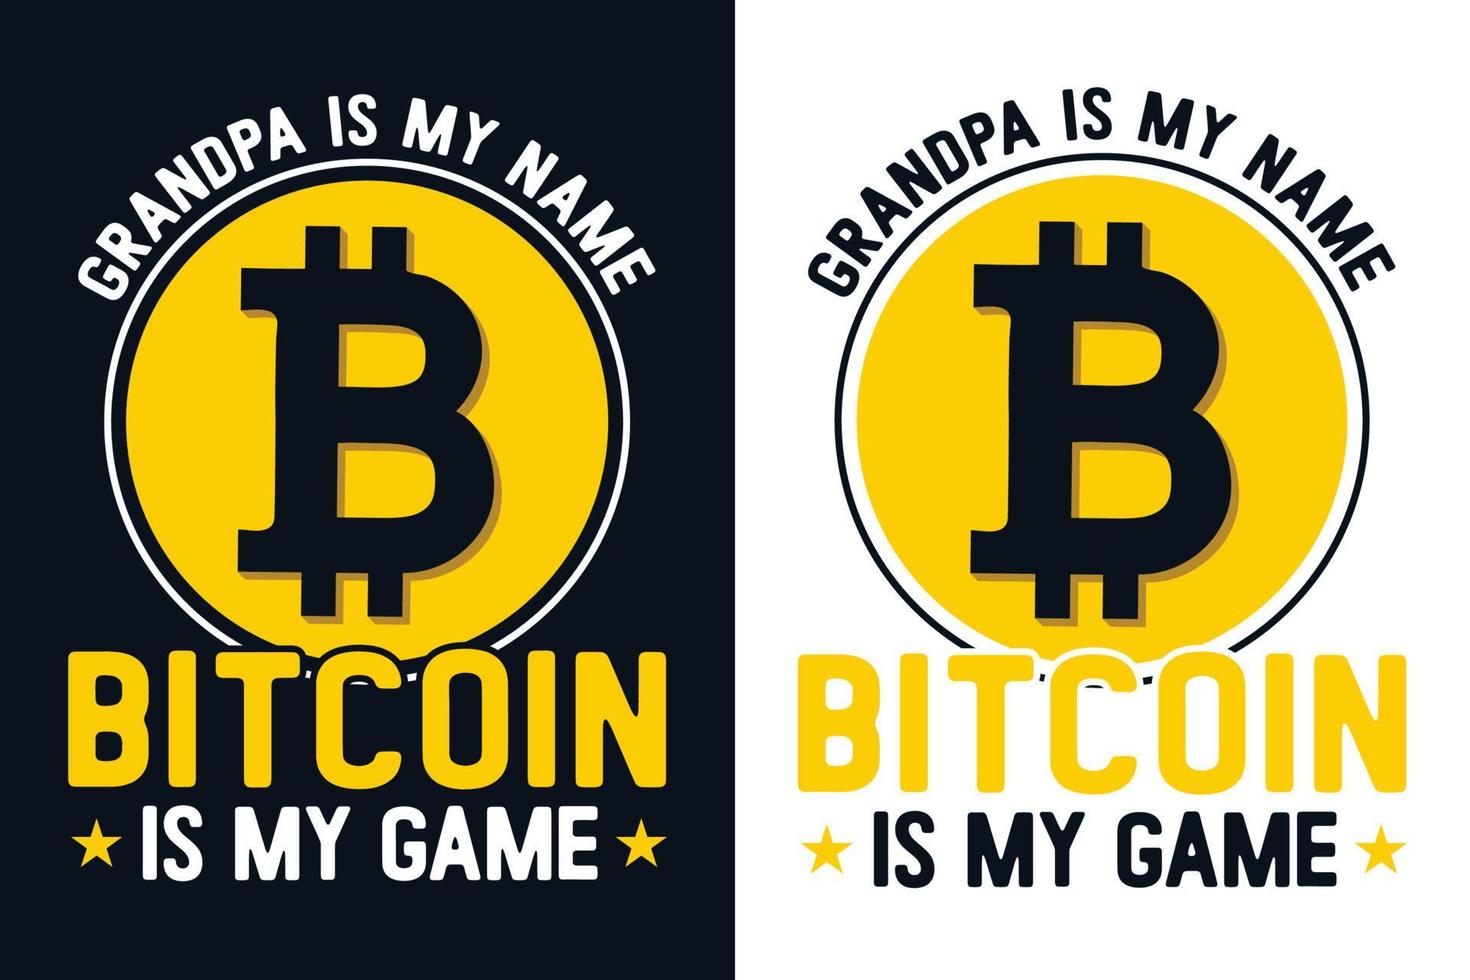 Grandpa is my name Bitcoin is my game t shirt design vector